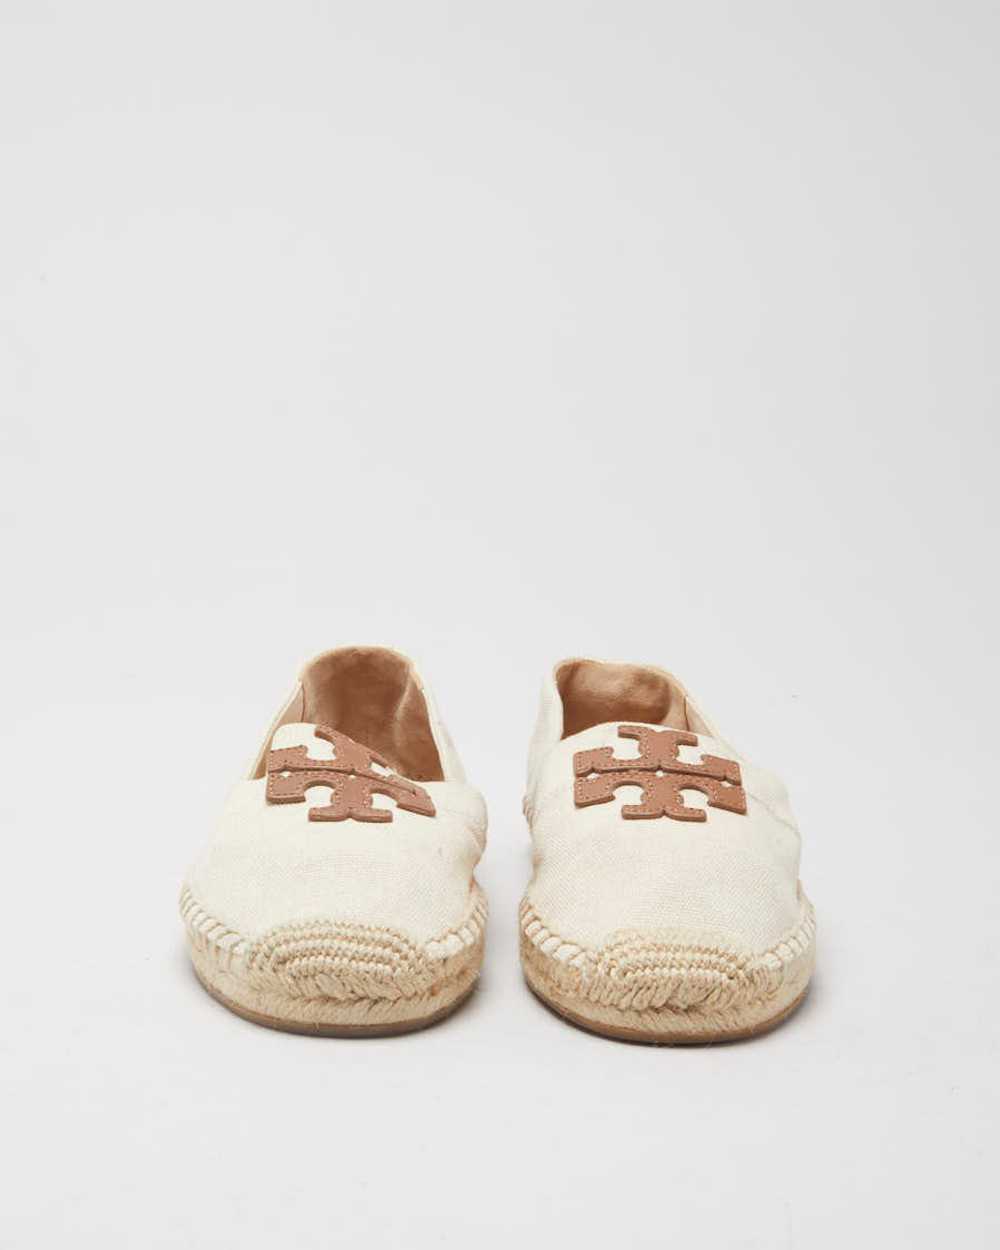 Tory Burch Cream & Brown Canvas Shoes - UK 3.5 - image 3